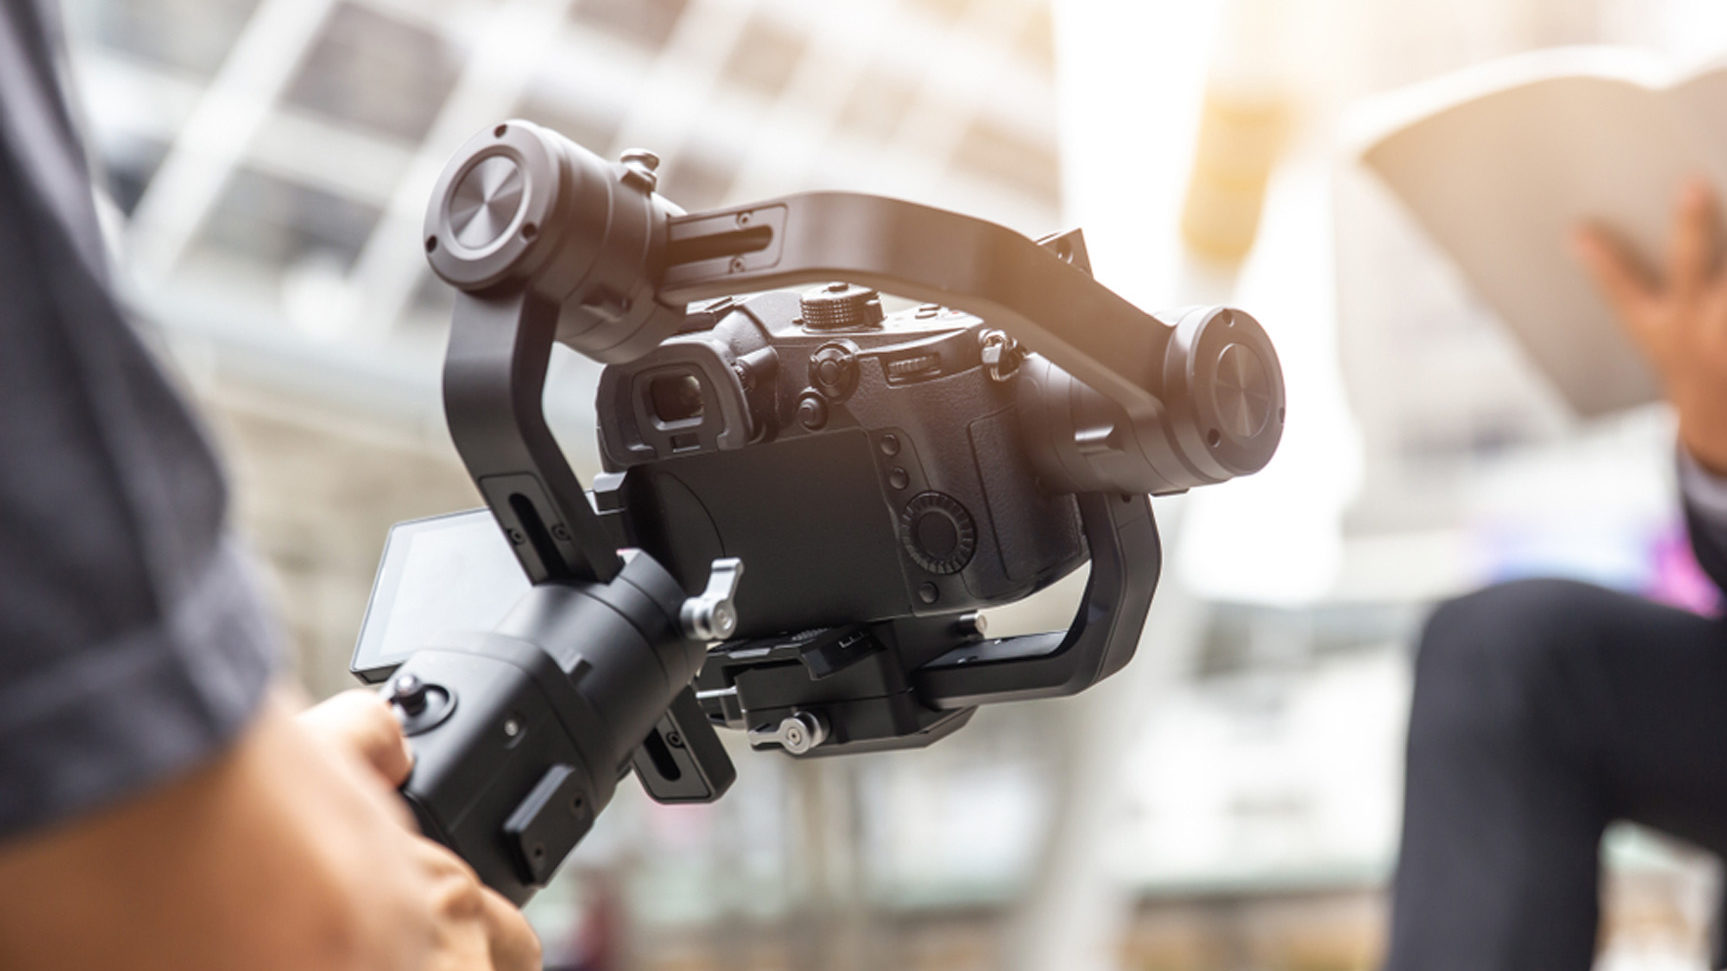 Image showing a Camera on Gimbal from the SmartCuts Creative Agency studio in Lausanne and Geneva, Switzerland for the purposes of creative communication.